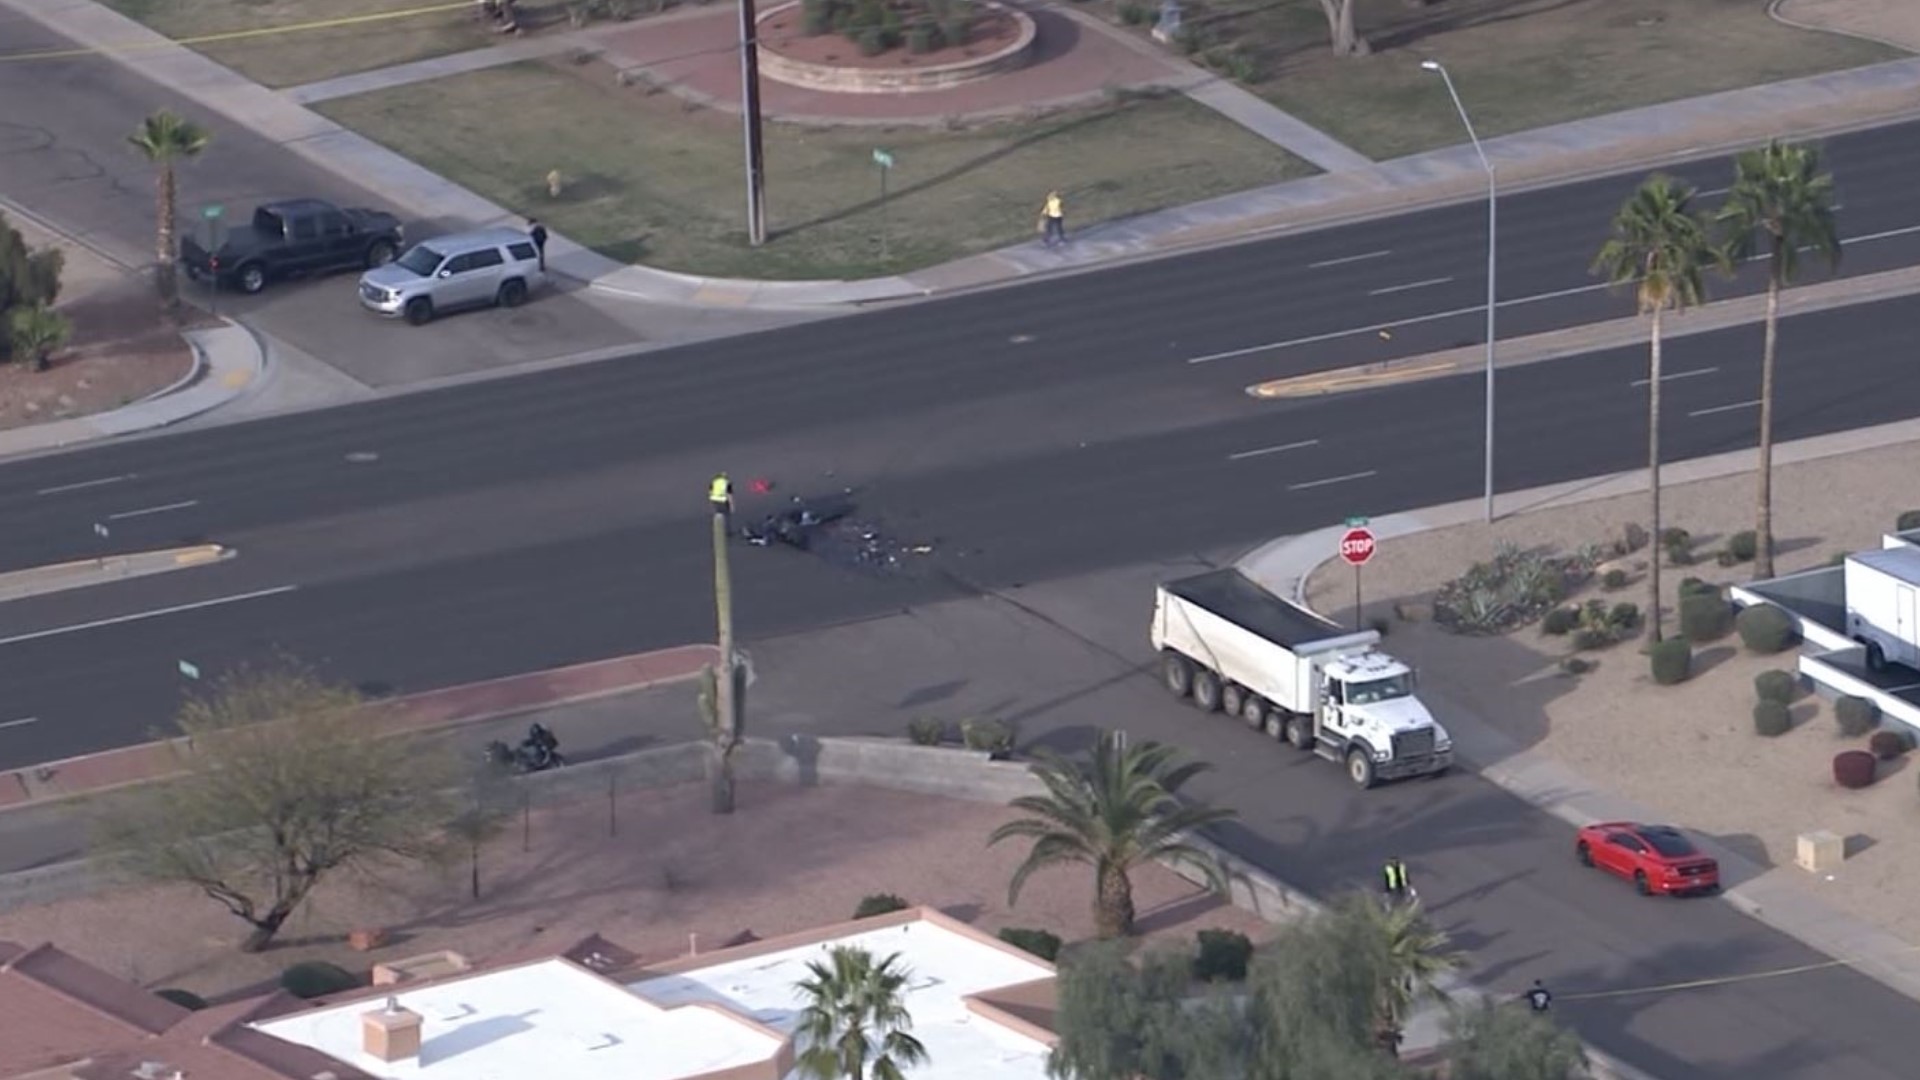 Scottsdale police have responded to a deadly motorcycle crash near 68th Street and Shea Boulevard.